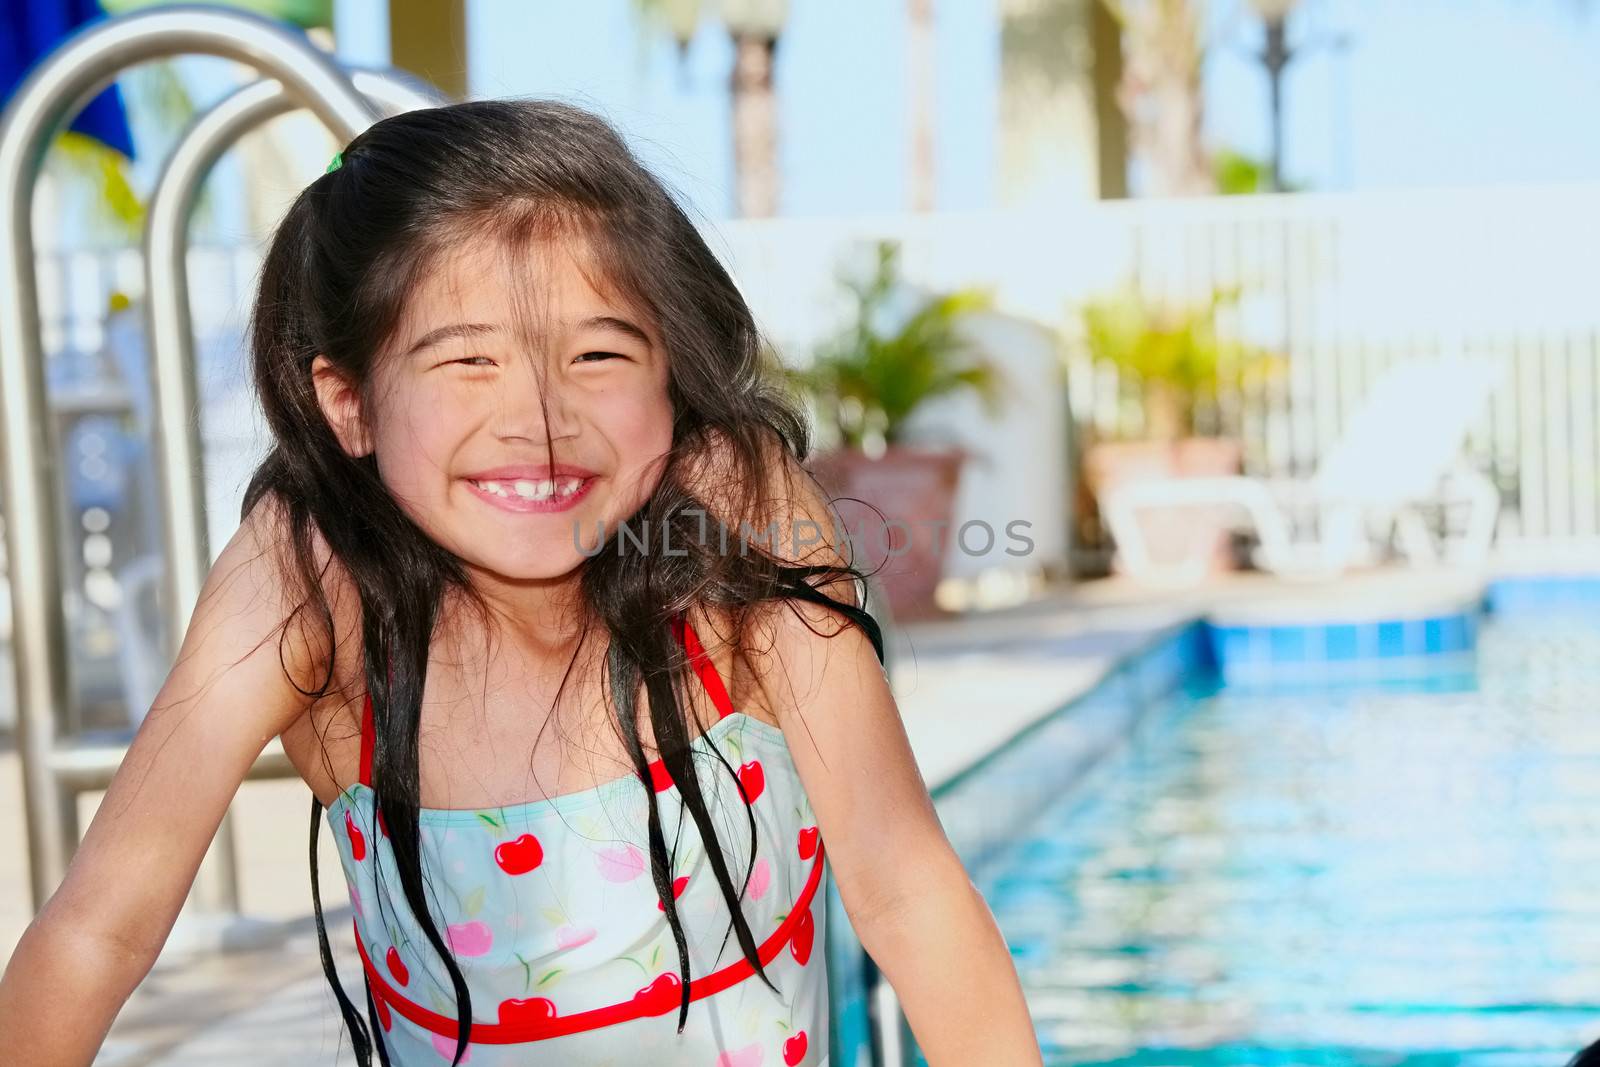 Little girl at the pool by jarenwicklund